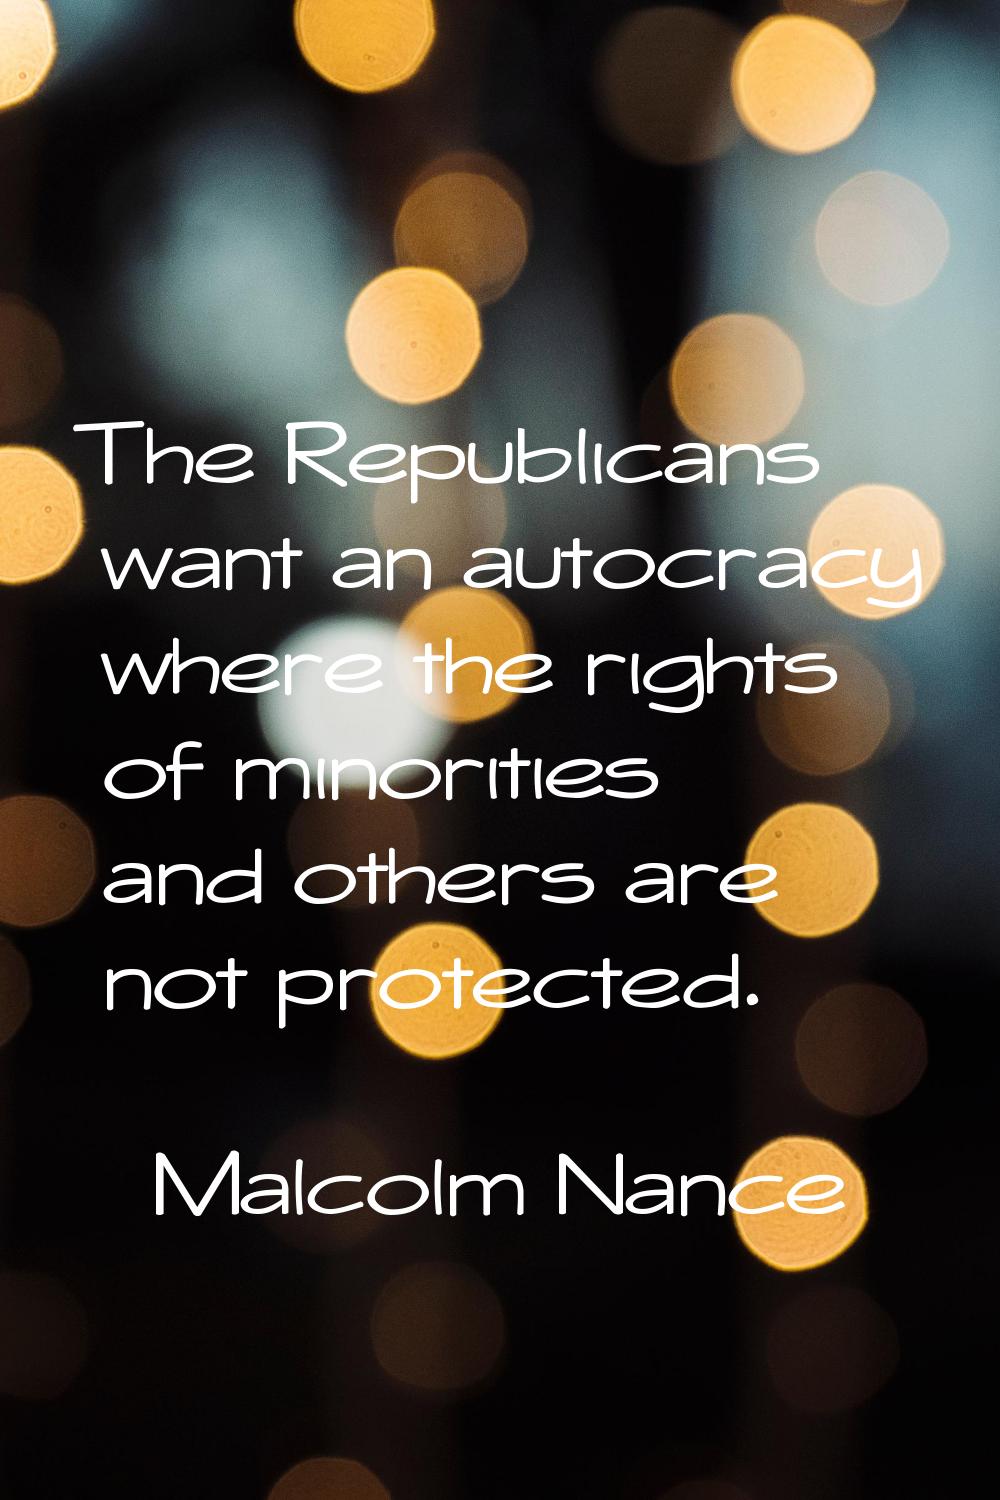 The Republicans want an autocracy where the rights of minorities and others are not protected.